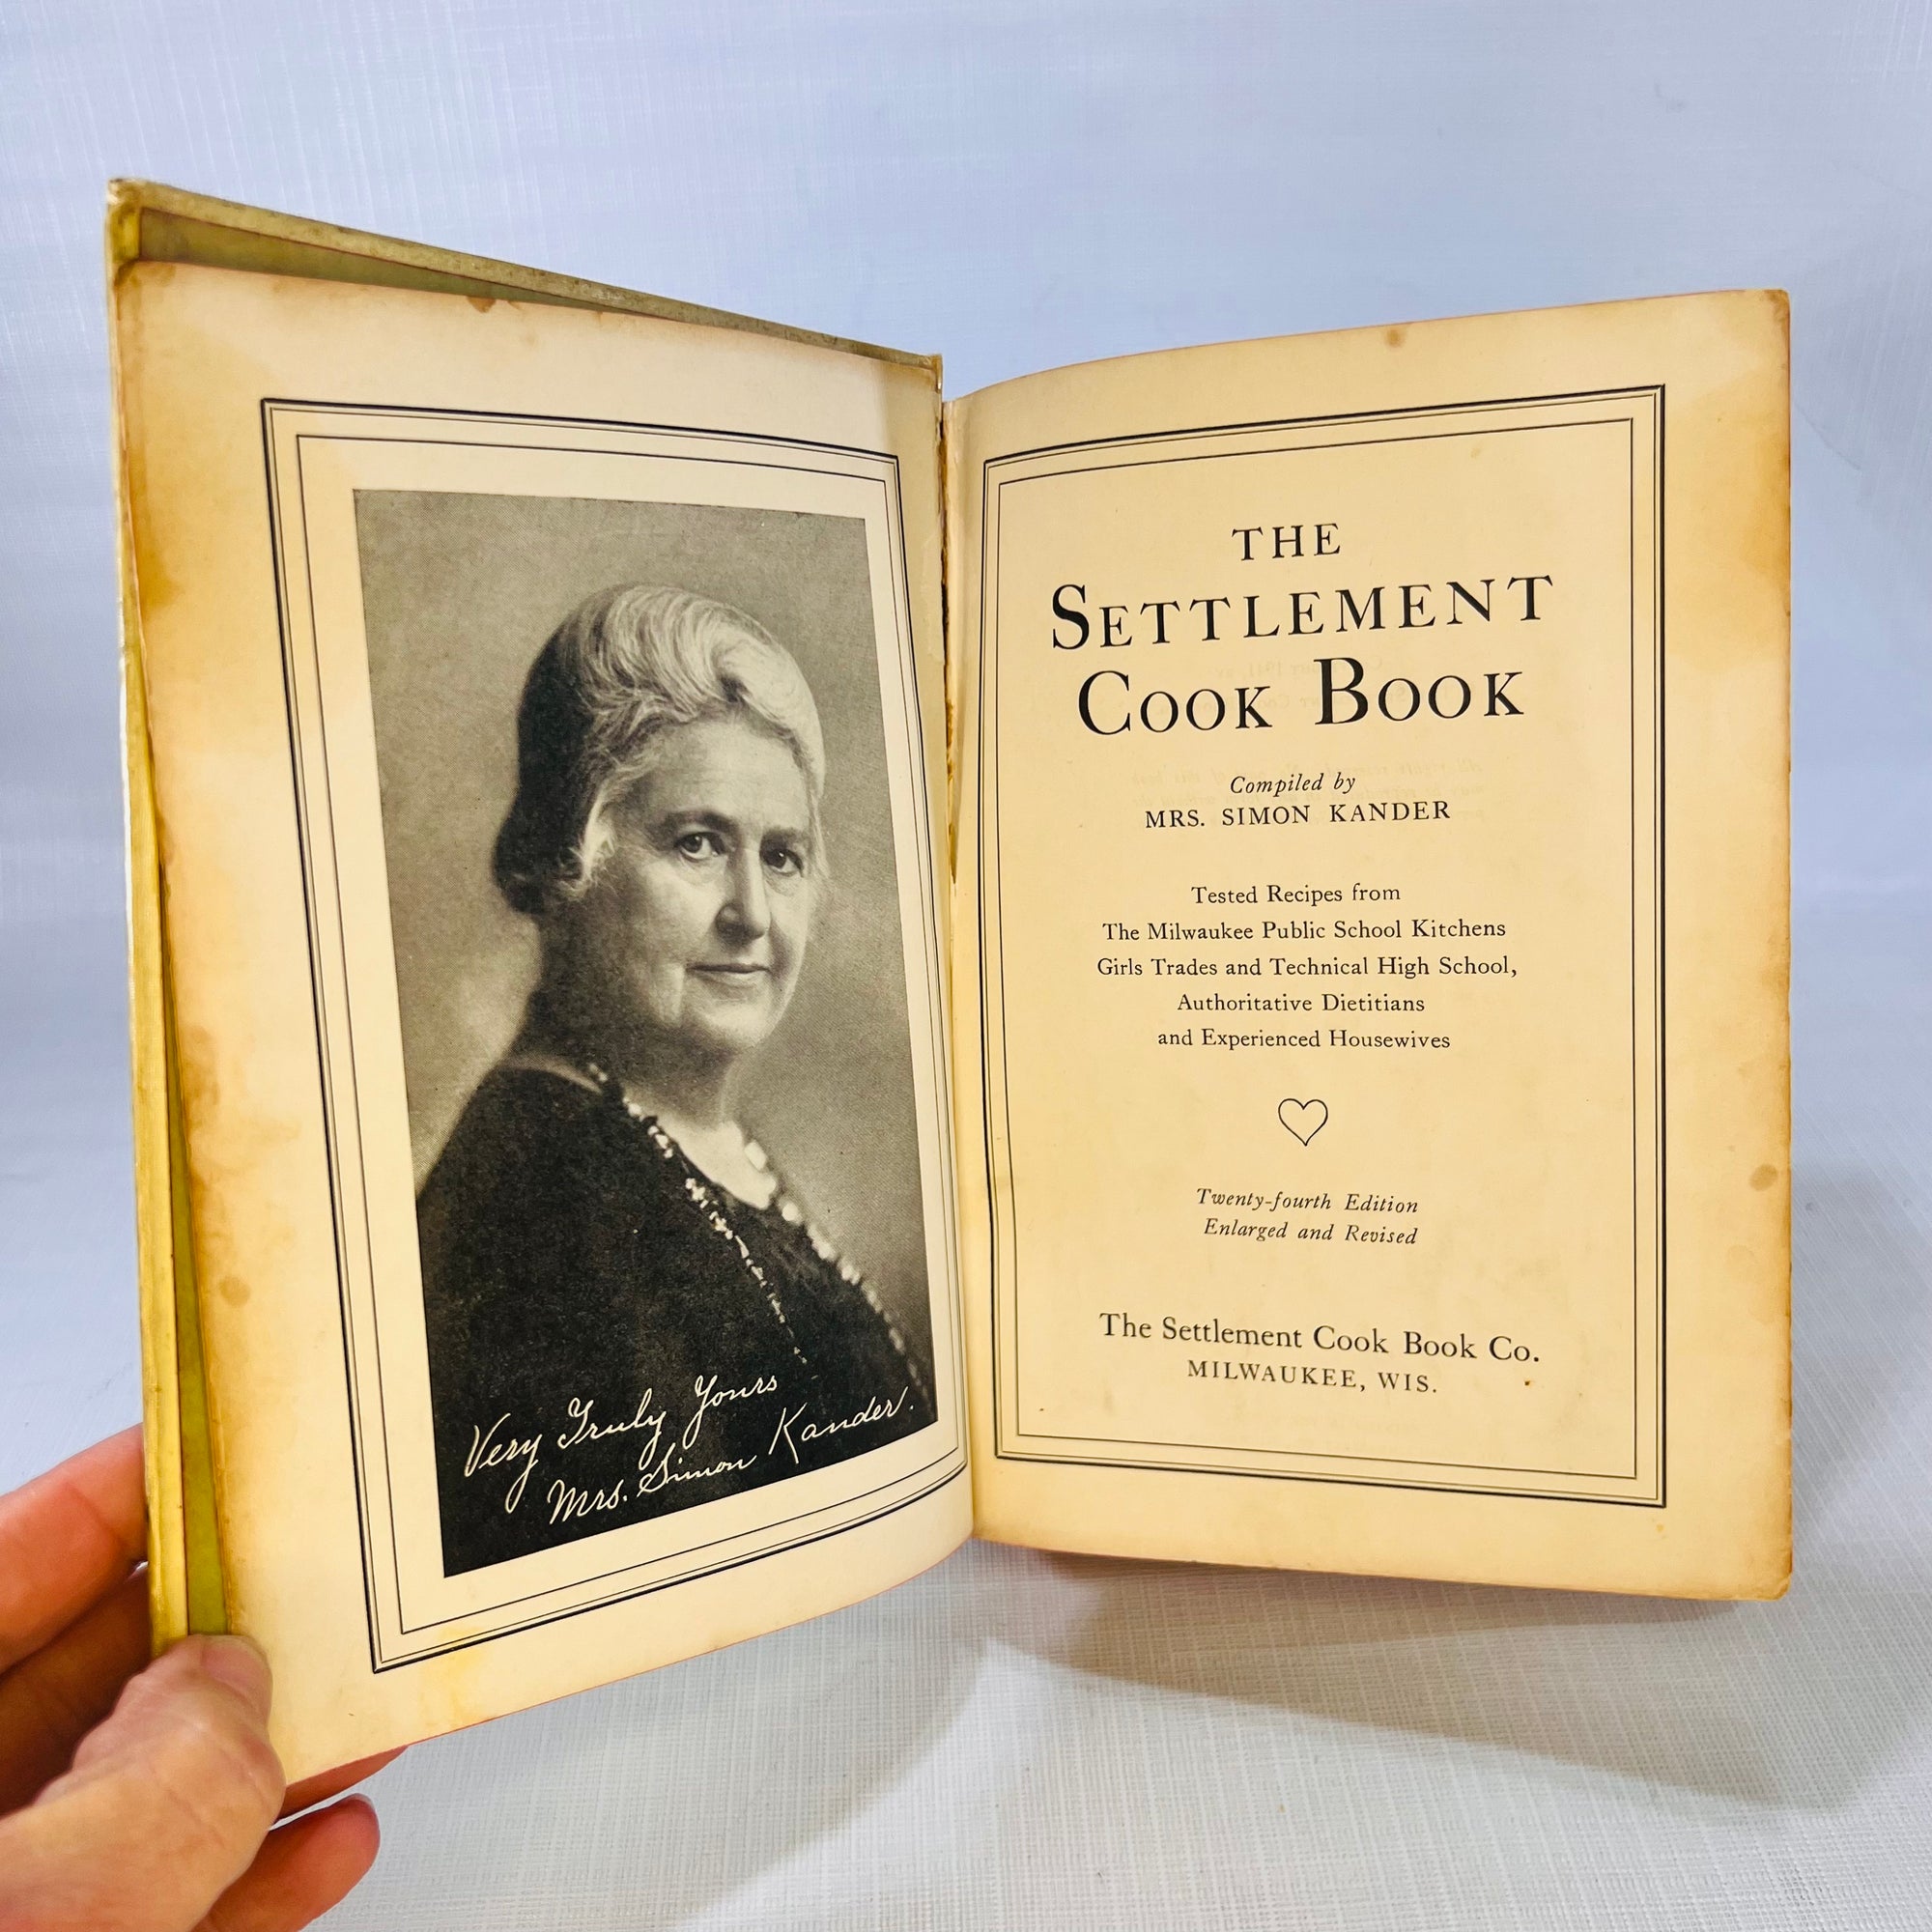 The Settlement Cook Book compiled by Mrs. Simon Kander 1941 Thumbtab Index The Settlement Cook Book Co.